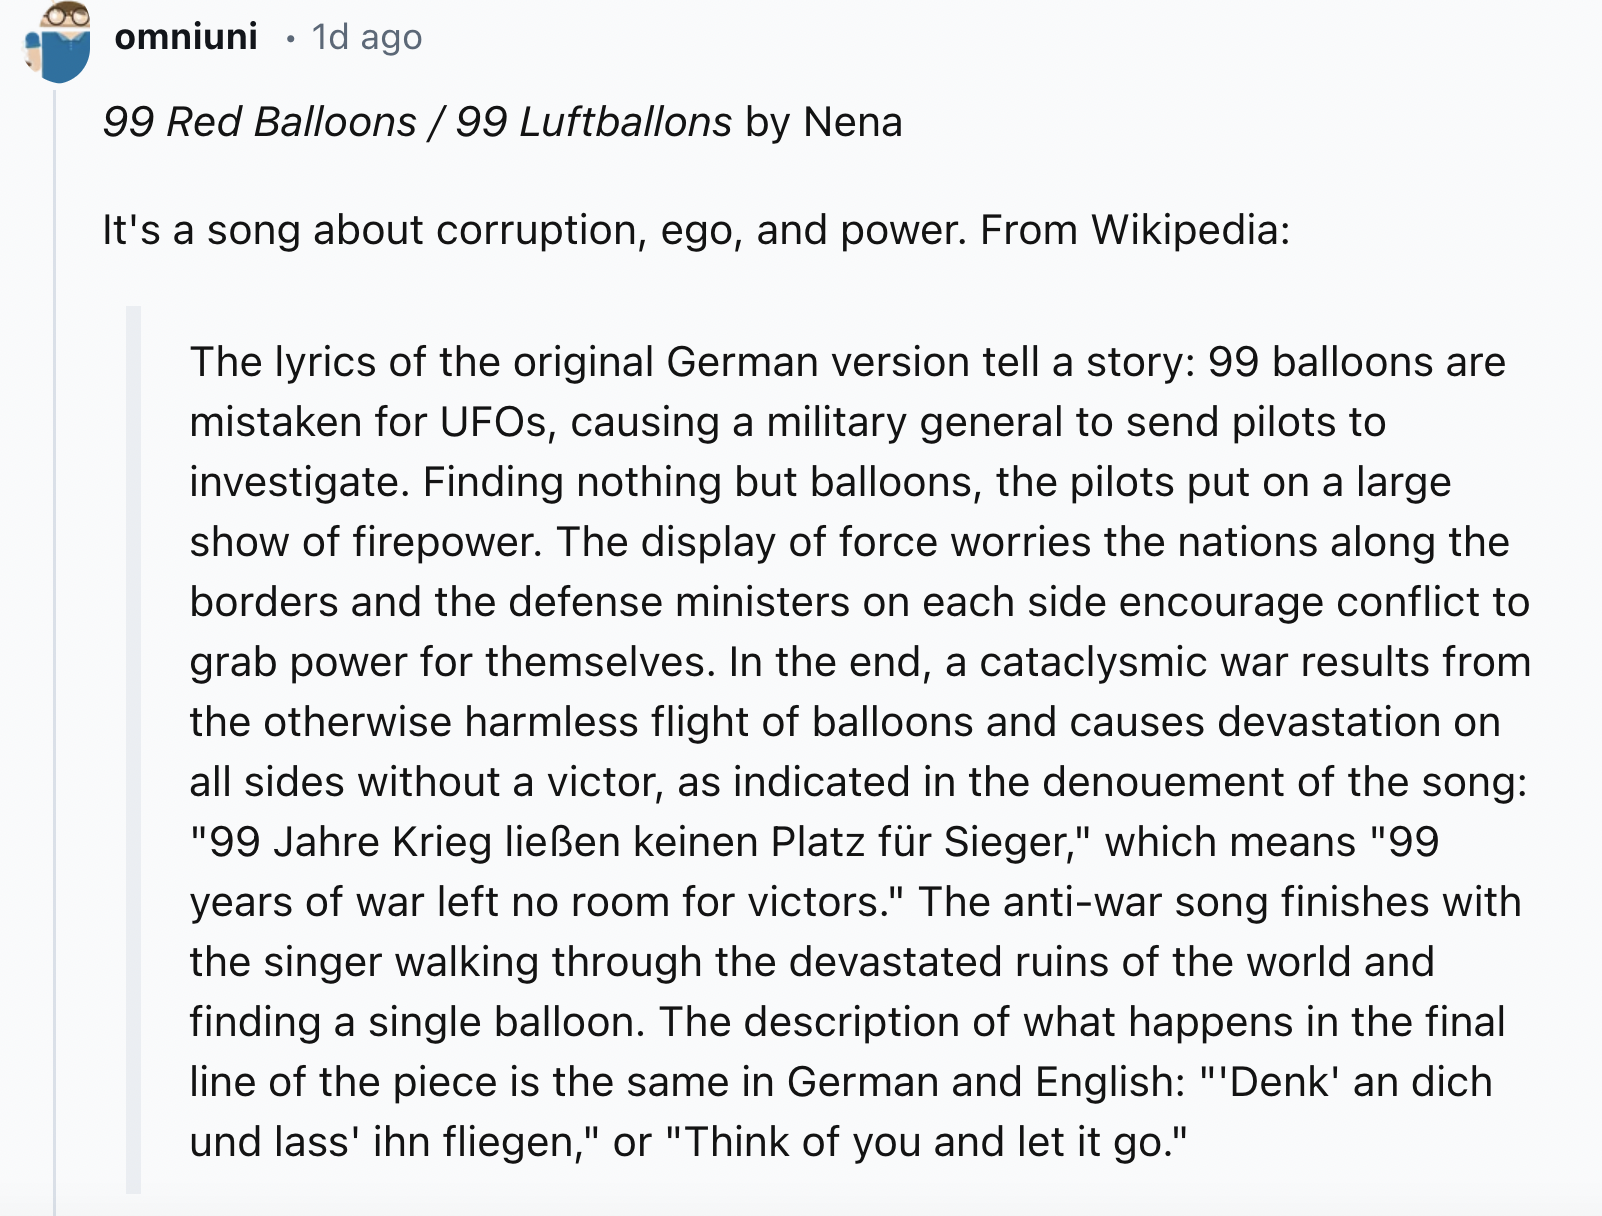 document - omniuni . 1d ago 99 Red Balloons 99 Luftballons by Nena It's a song about corruption, ego, and power. From Wikipedia The lyrics of the original German version tell a story 99 balloons are mistaken for UFOs, causing a military general to send pi